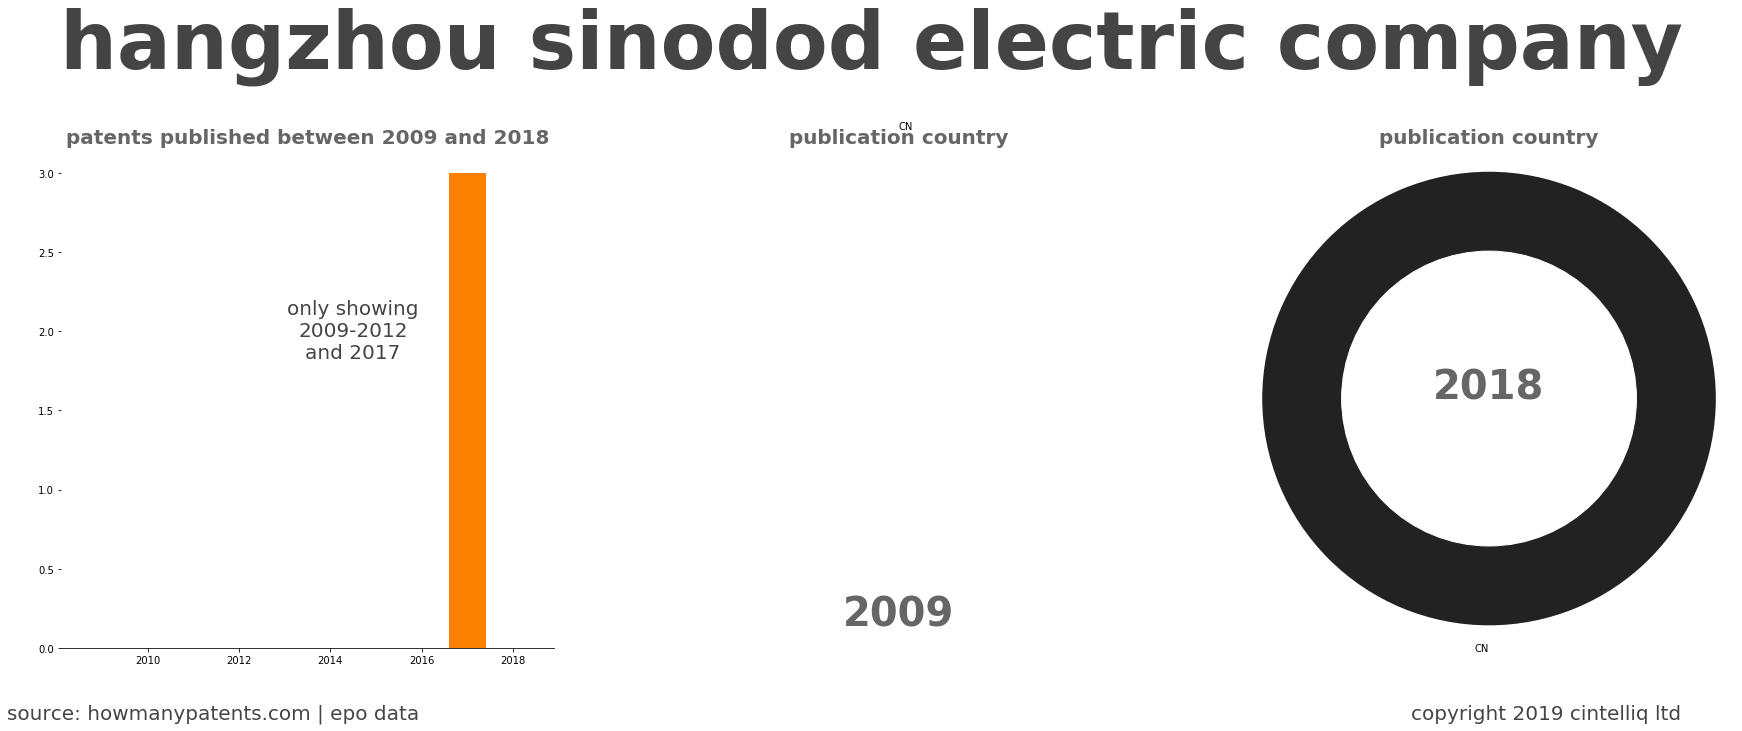 summary of patents for Hangzhou Sinodod Electric Company